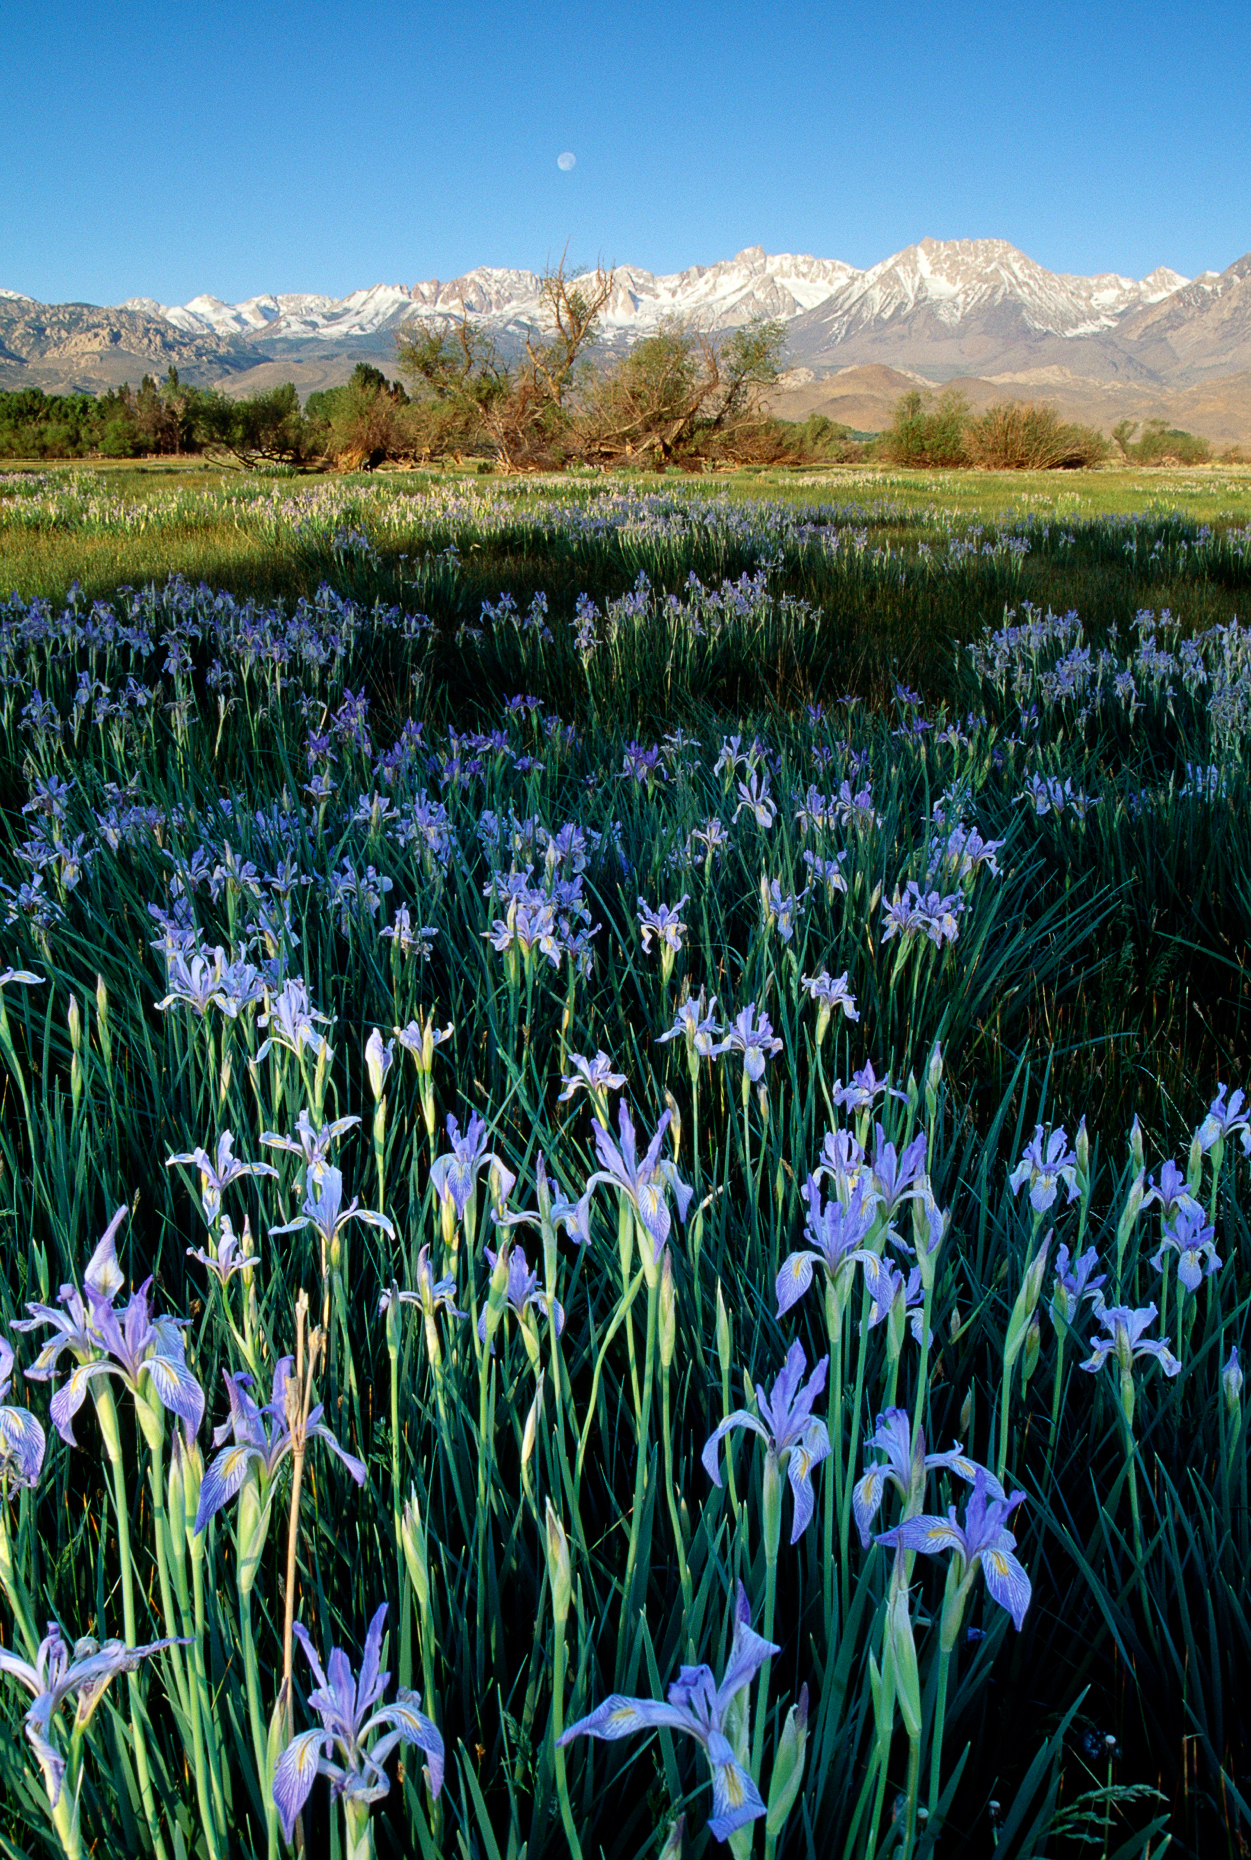 Fields of wild Irises, with the Eastern Sierra Mountains in the distance, California, USA